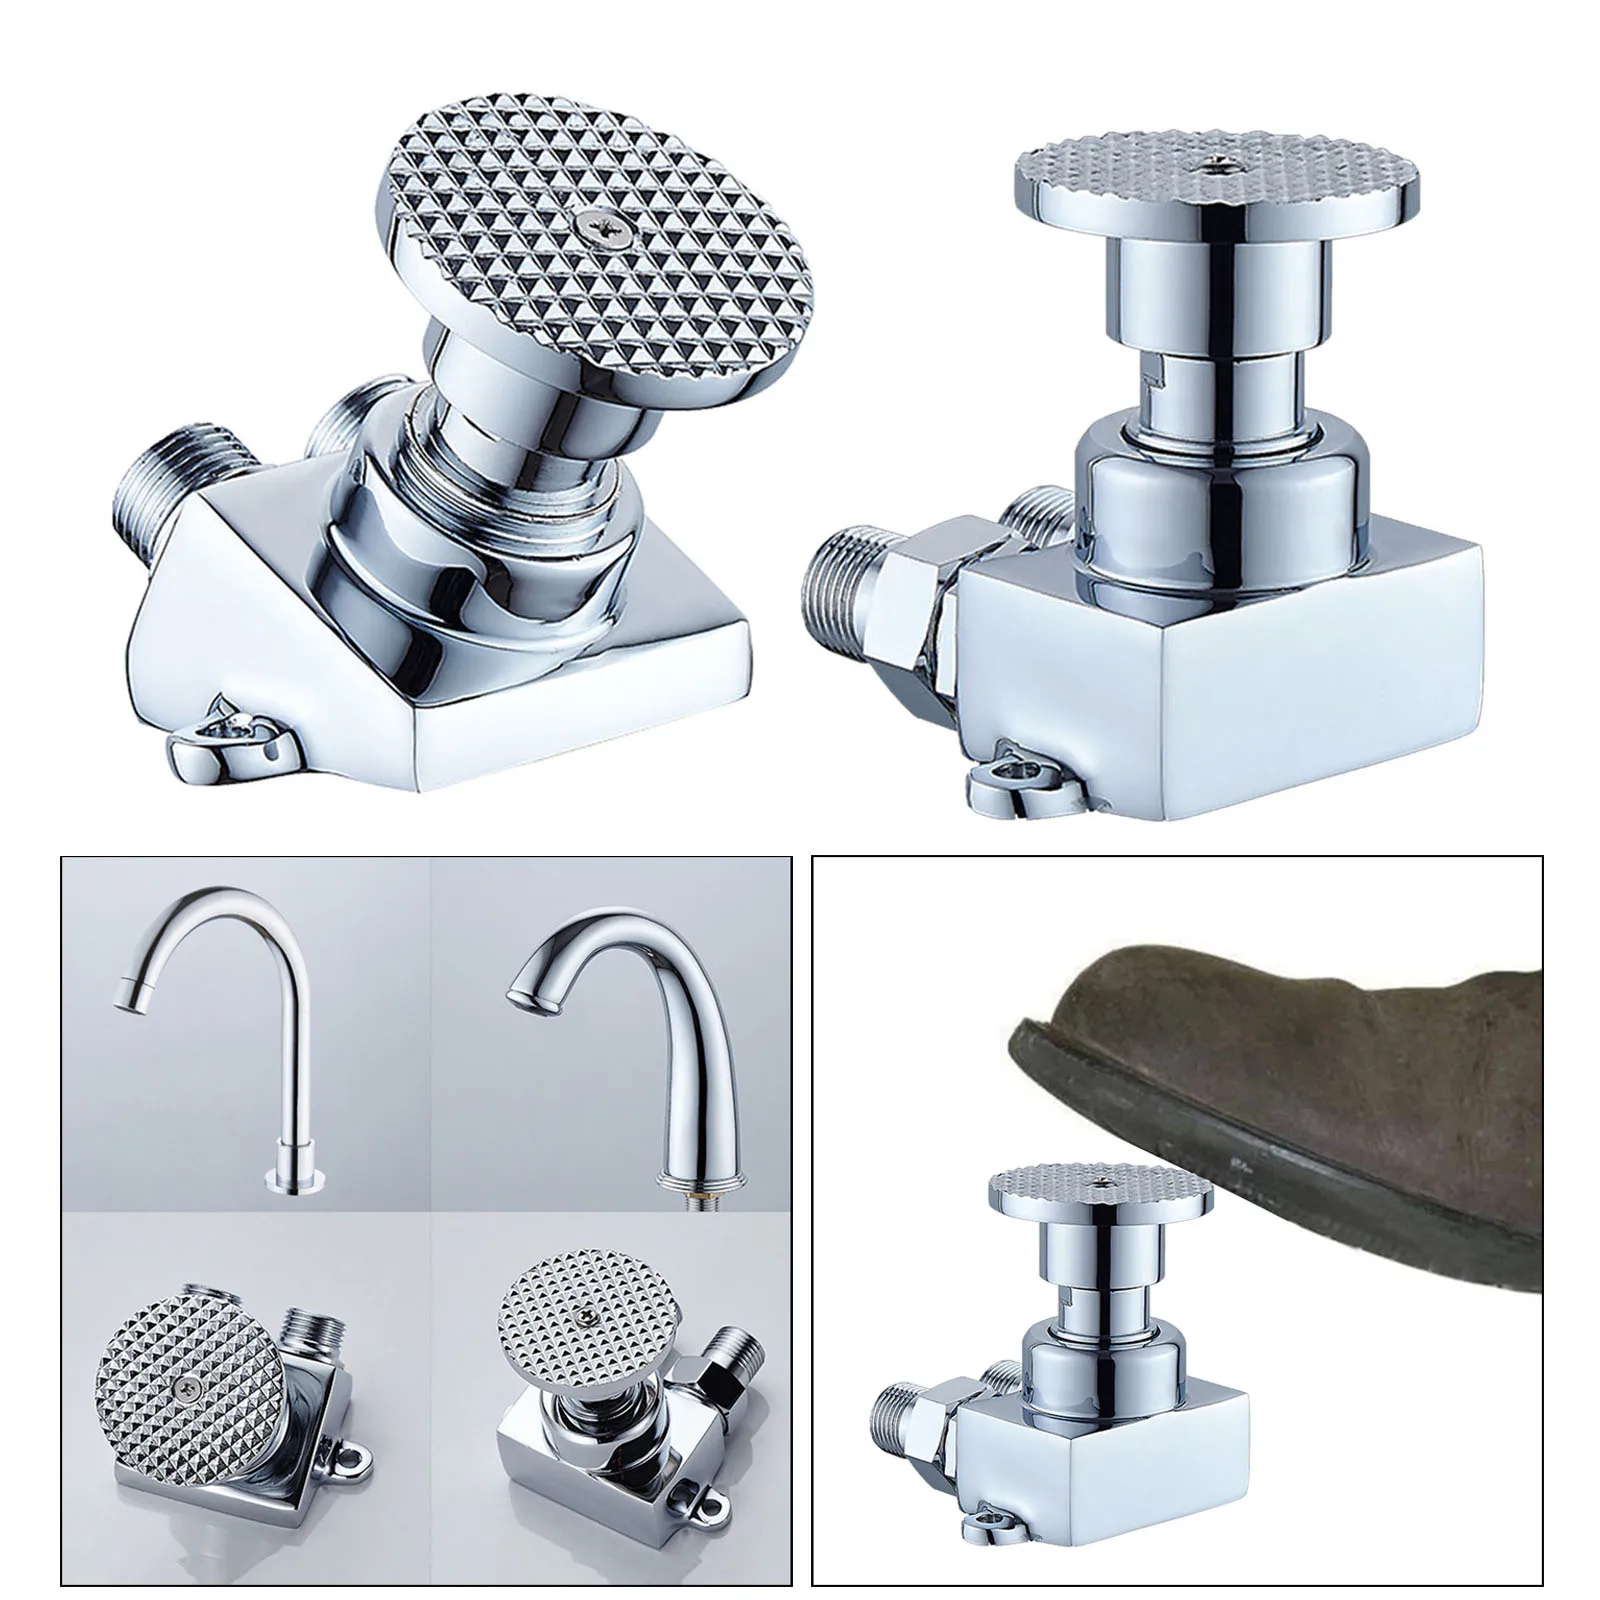 Floor Mount Foot Pedal Valve Brass Basin Sink Faucet Tap Pedal Water Faucets